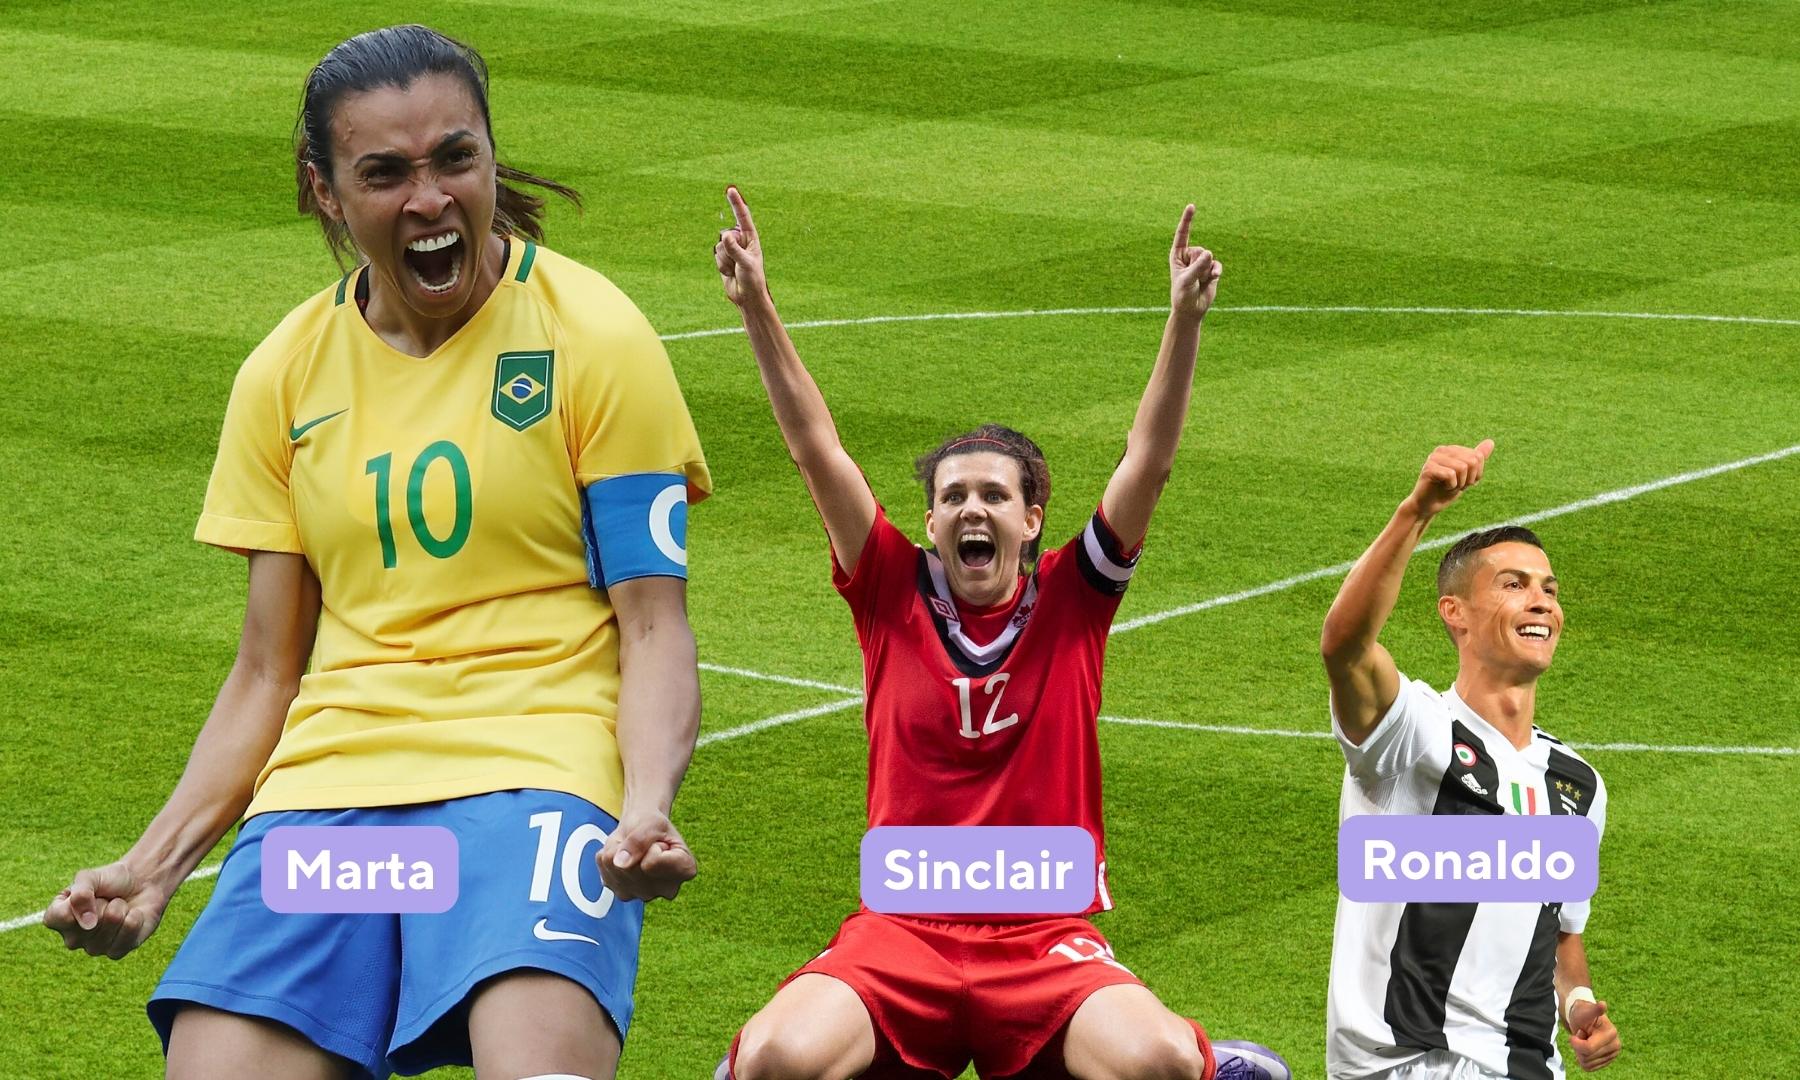 Soccer statistics first players to score five World Cups include Marta, Christine Sinclair, Ronaldo.